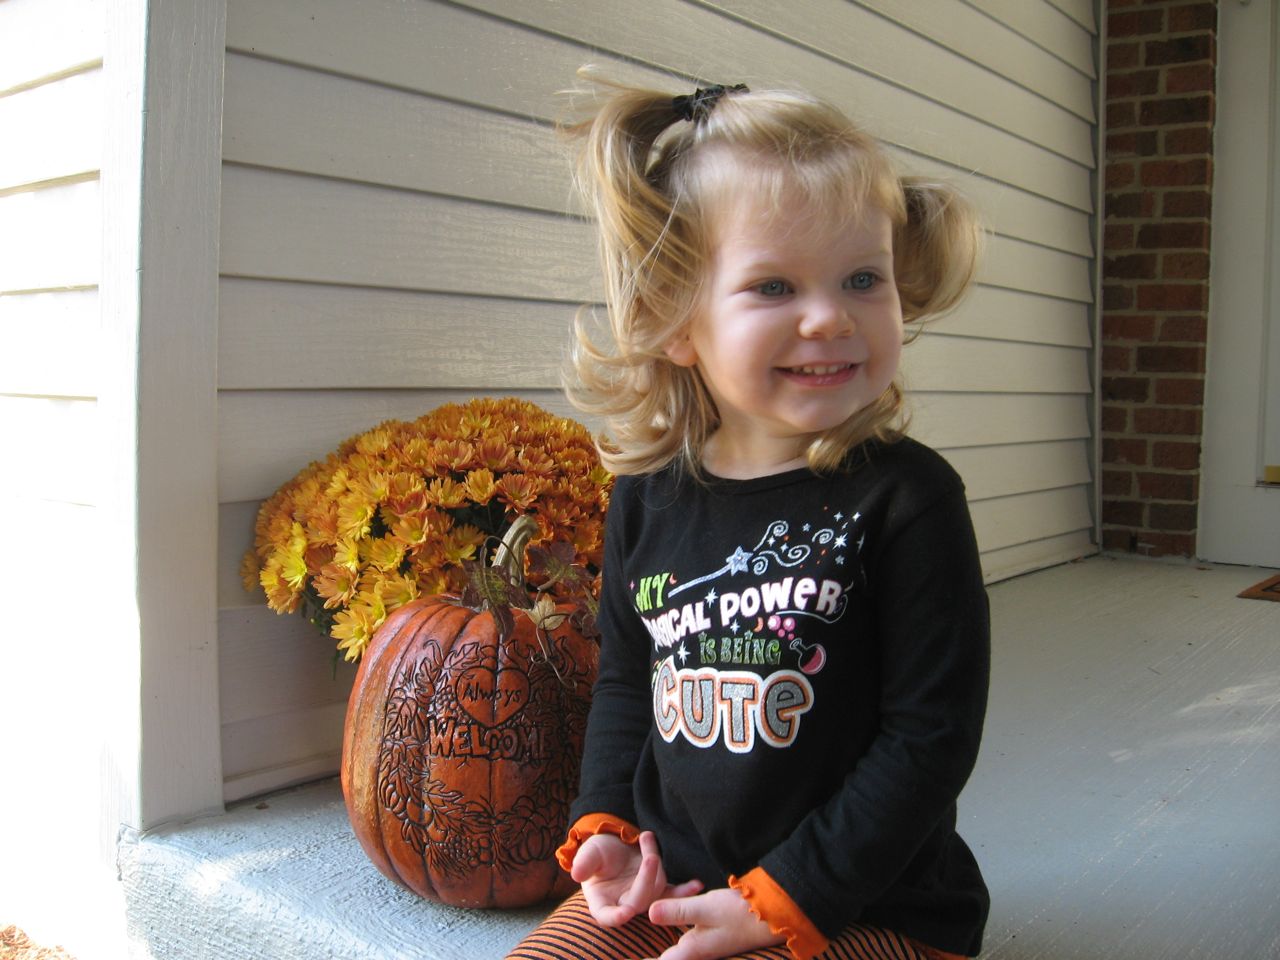 Amelia on the Porch Looking Cute